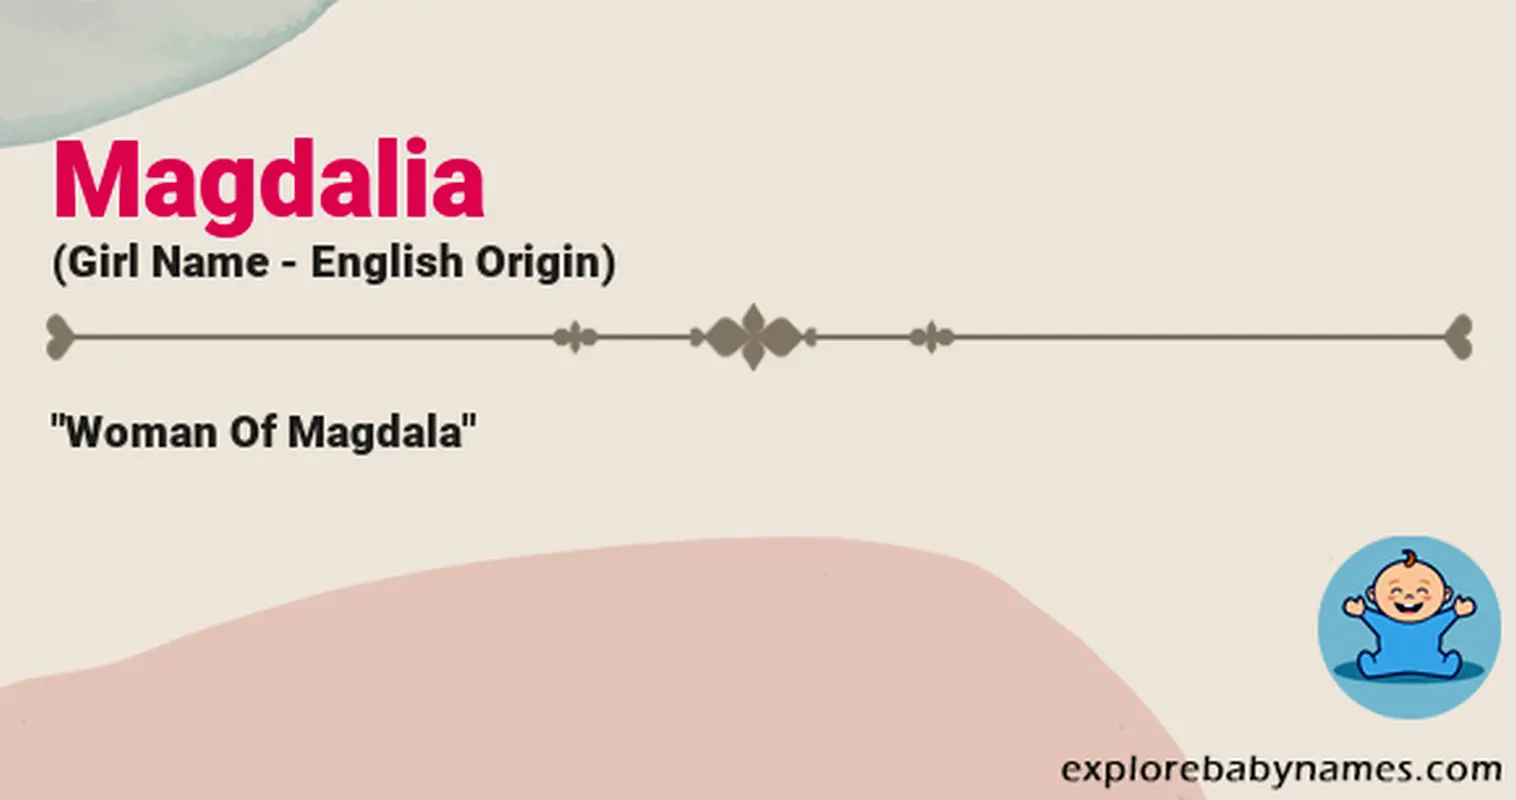 Meaning of Magdalia